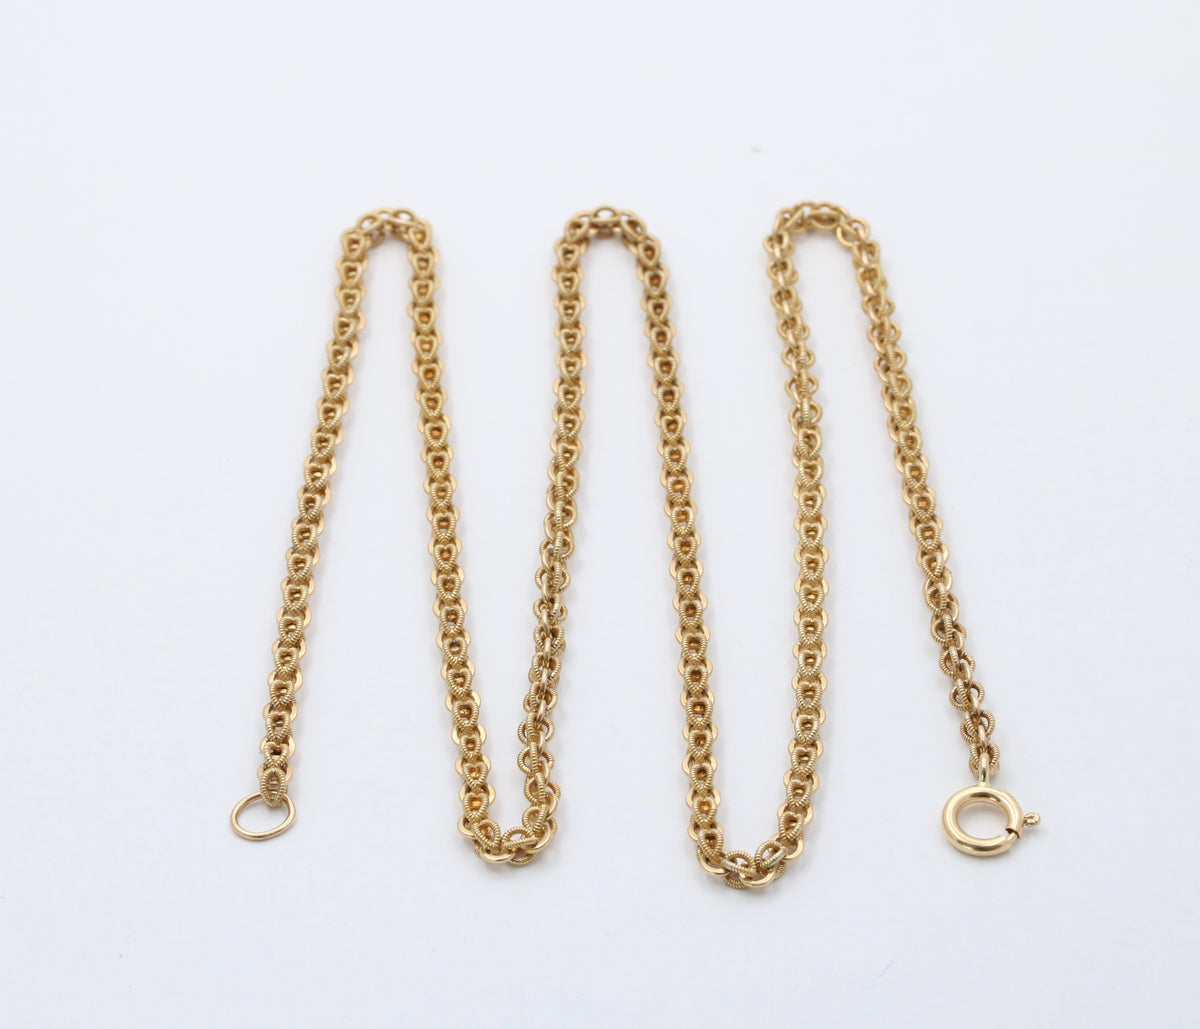 Victorian 14K Gold Open Link Textured Chain, 22 Inch Necklace